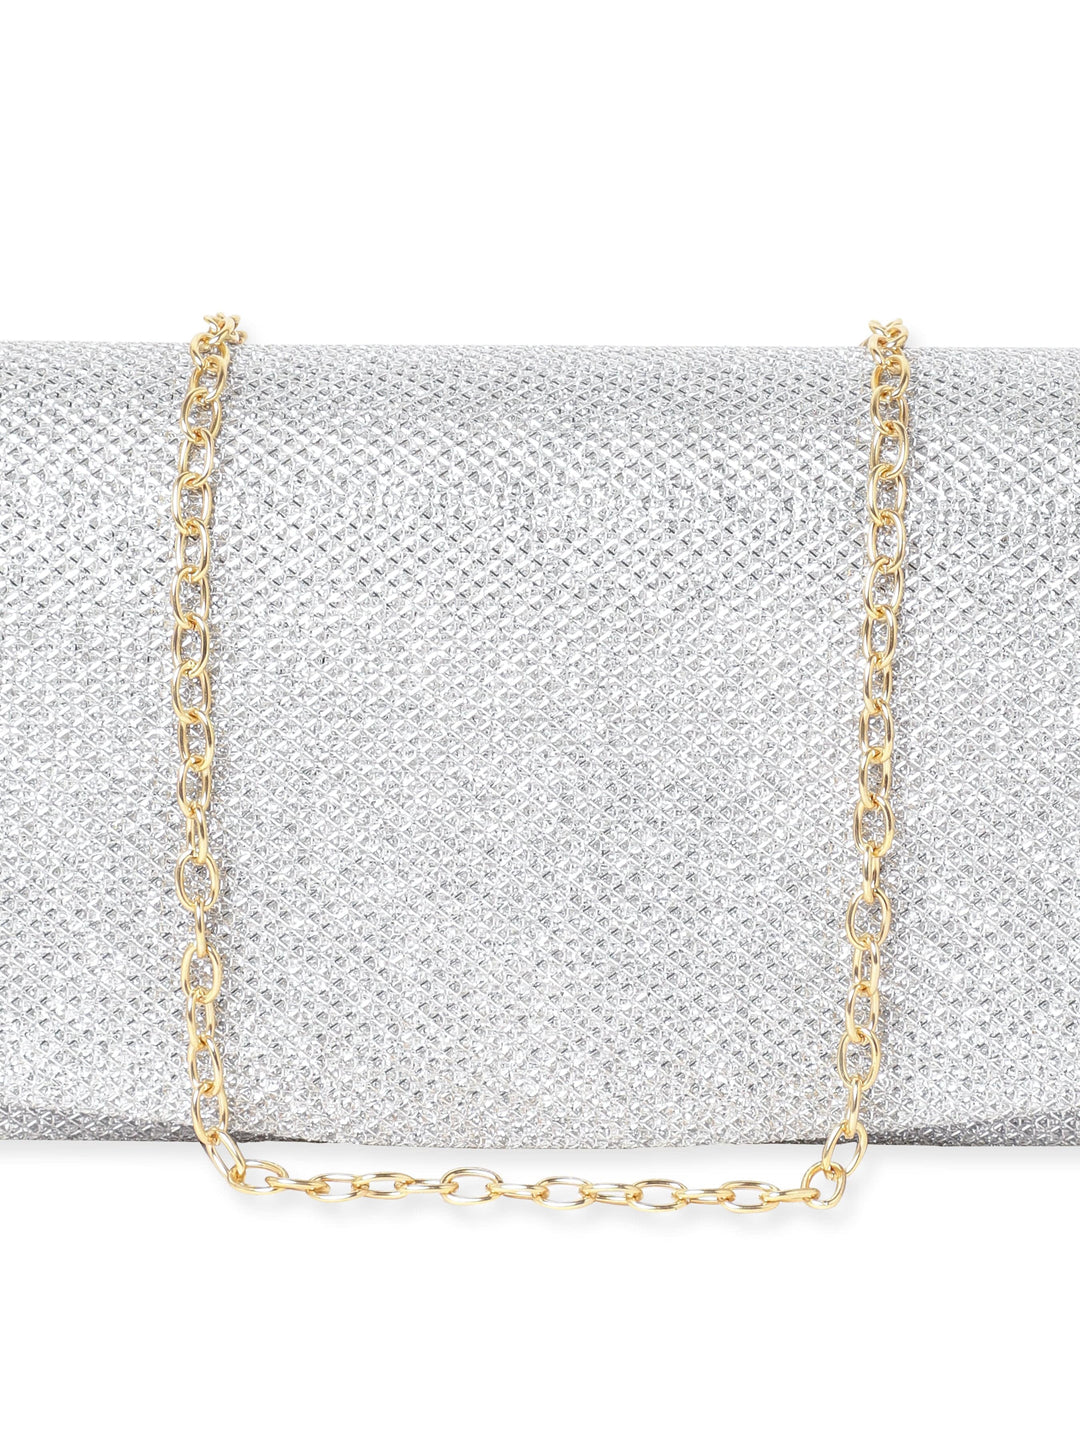 Rubans Timeless Radiance Handcrafted Silver Shimmery Clutch Bag Handbag, Wallet Accessories & Clutche